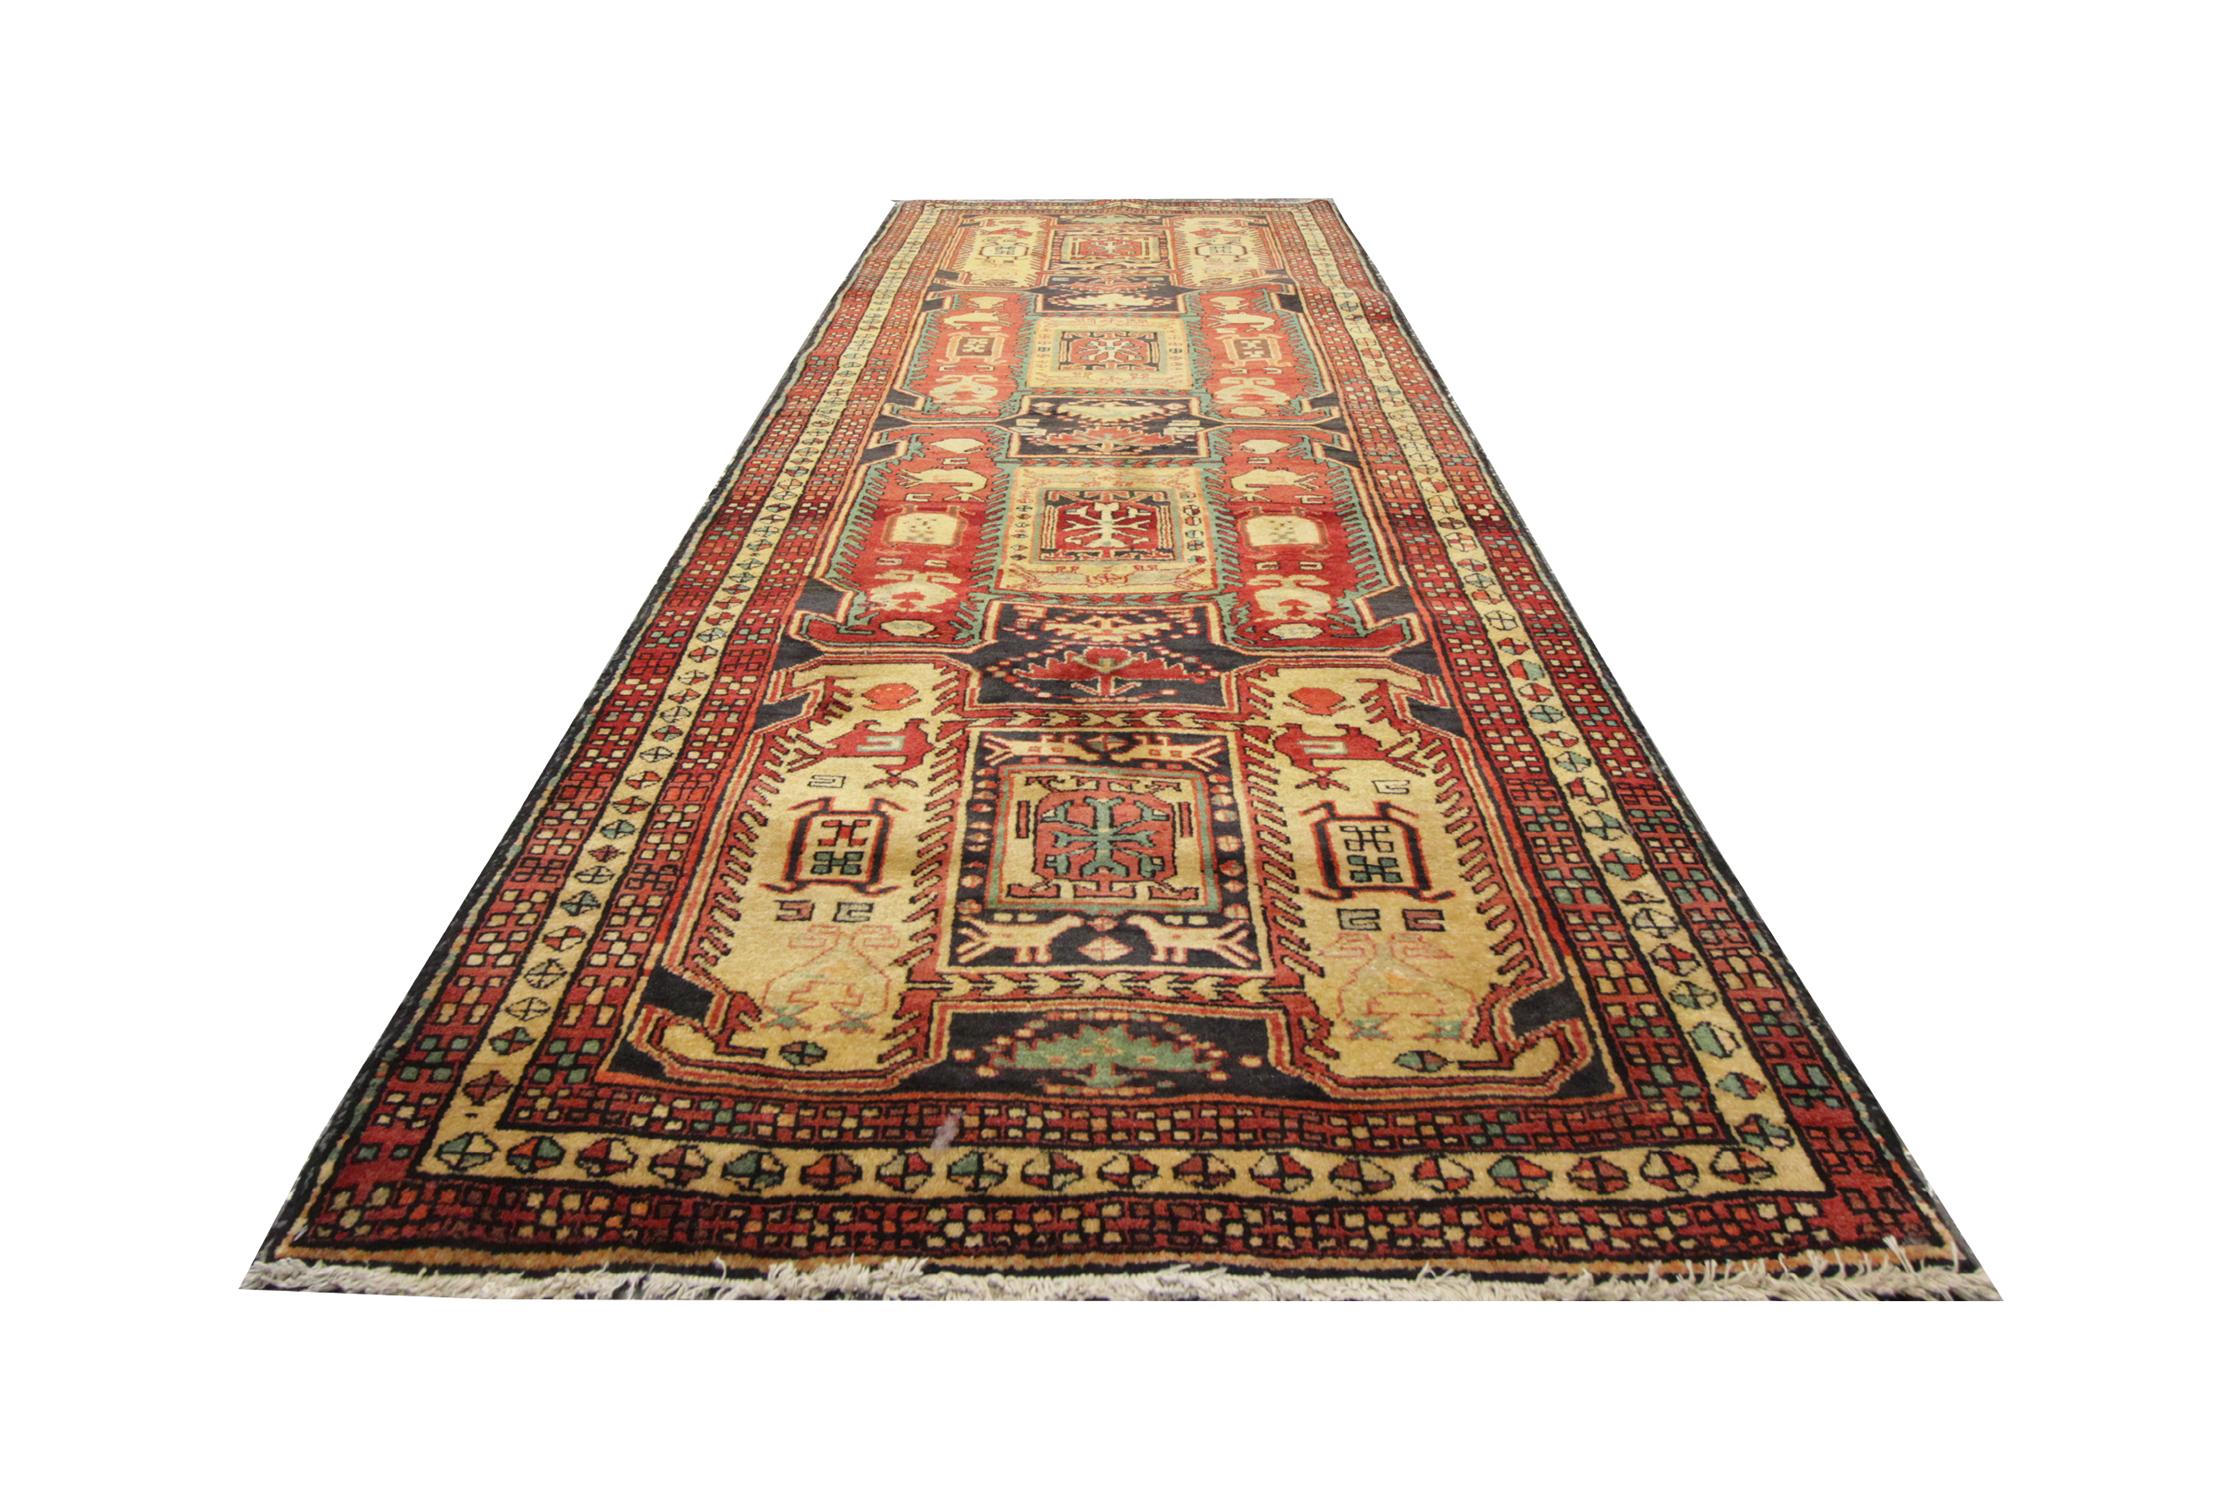 This genuinely unique runner rug was crafted by Azeri people, designed and handwoven with history and design in mind. This rug draws ideas from historical artefacts; for example, the handwoven birds on the carpet are from ancient hieroglyphics and